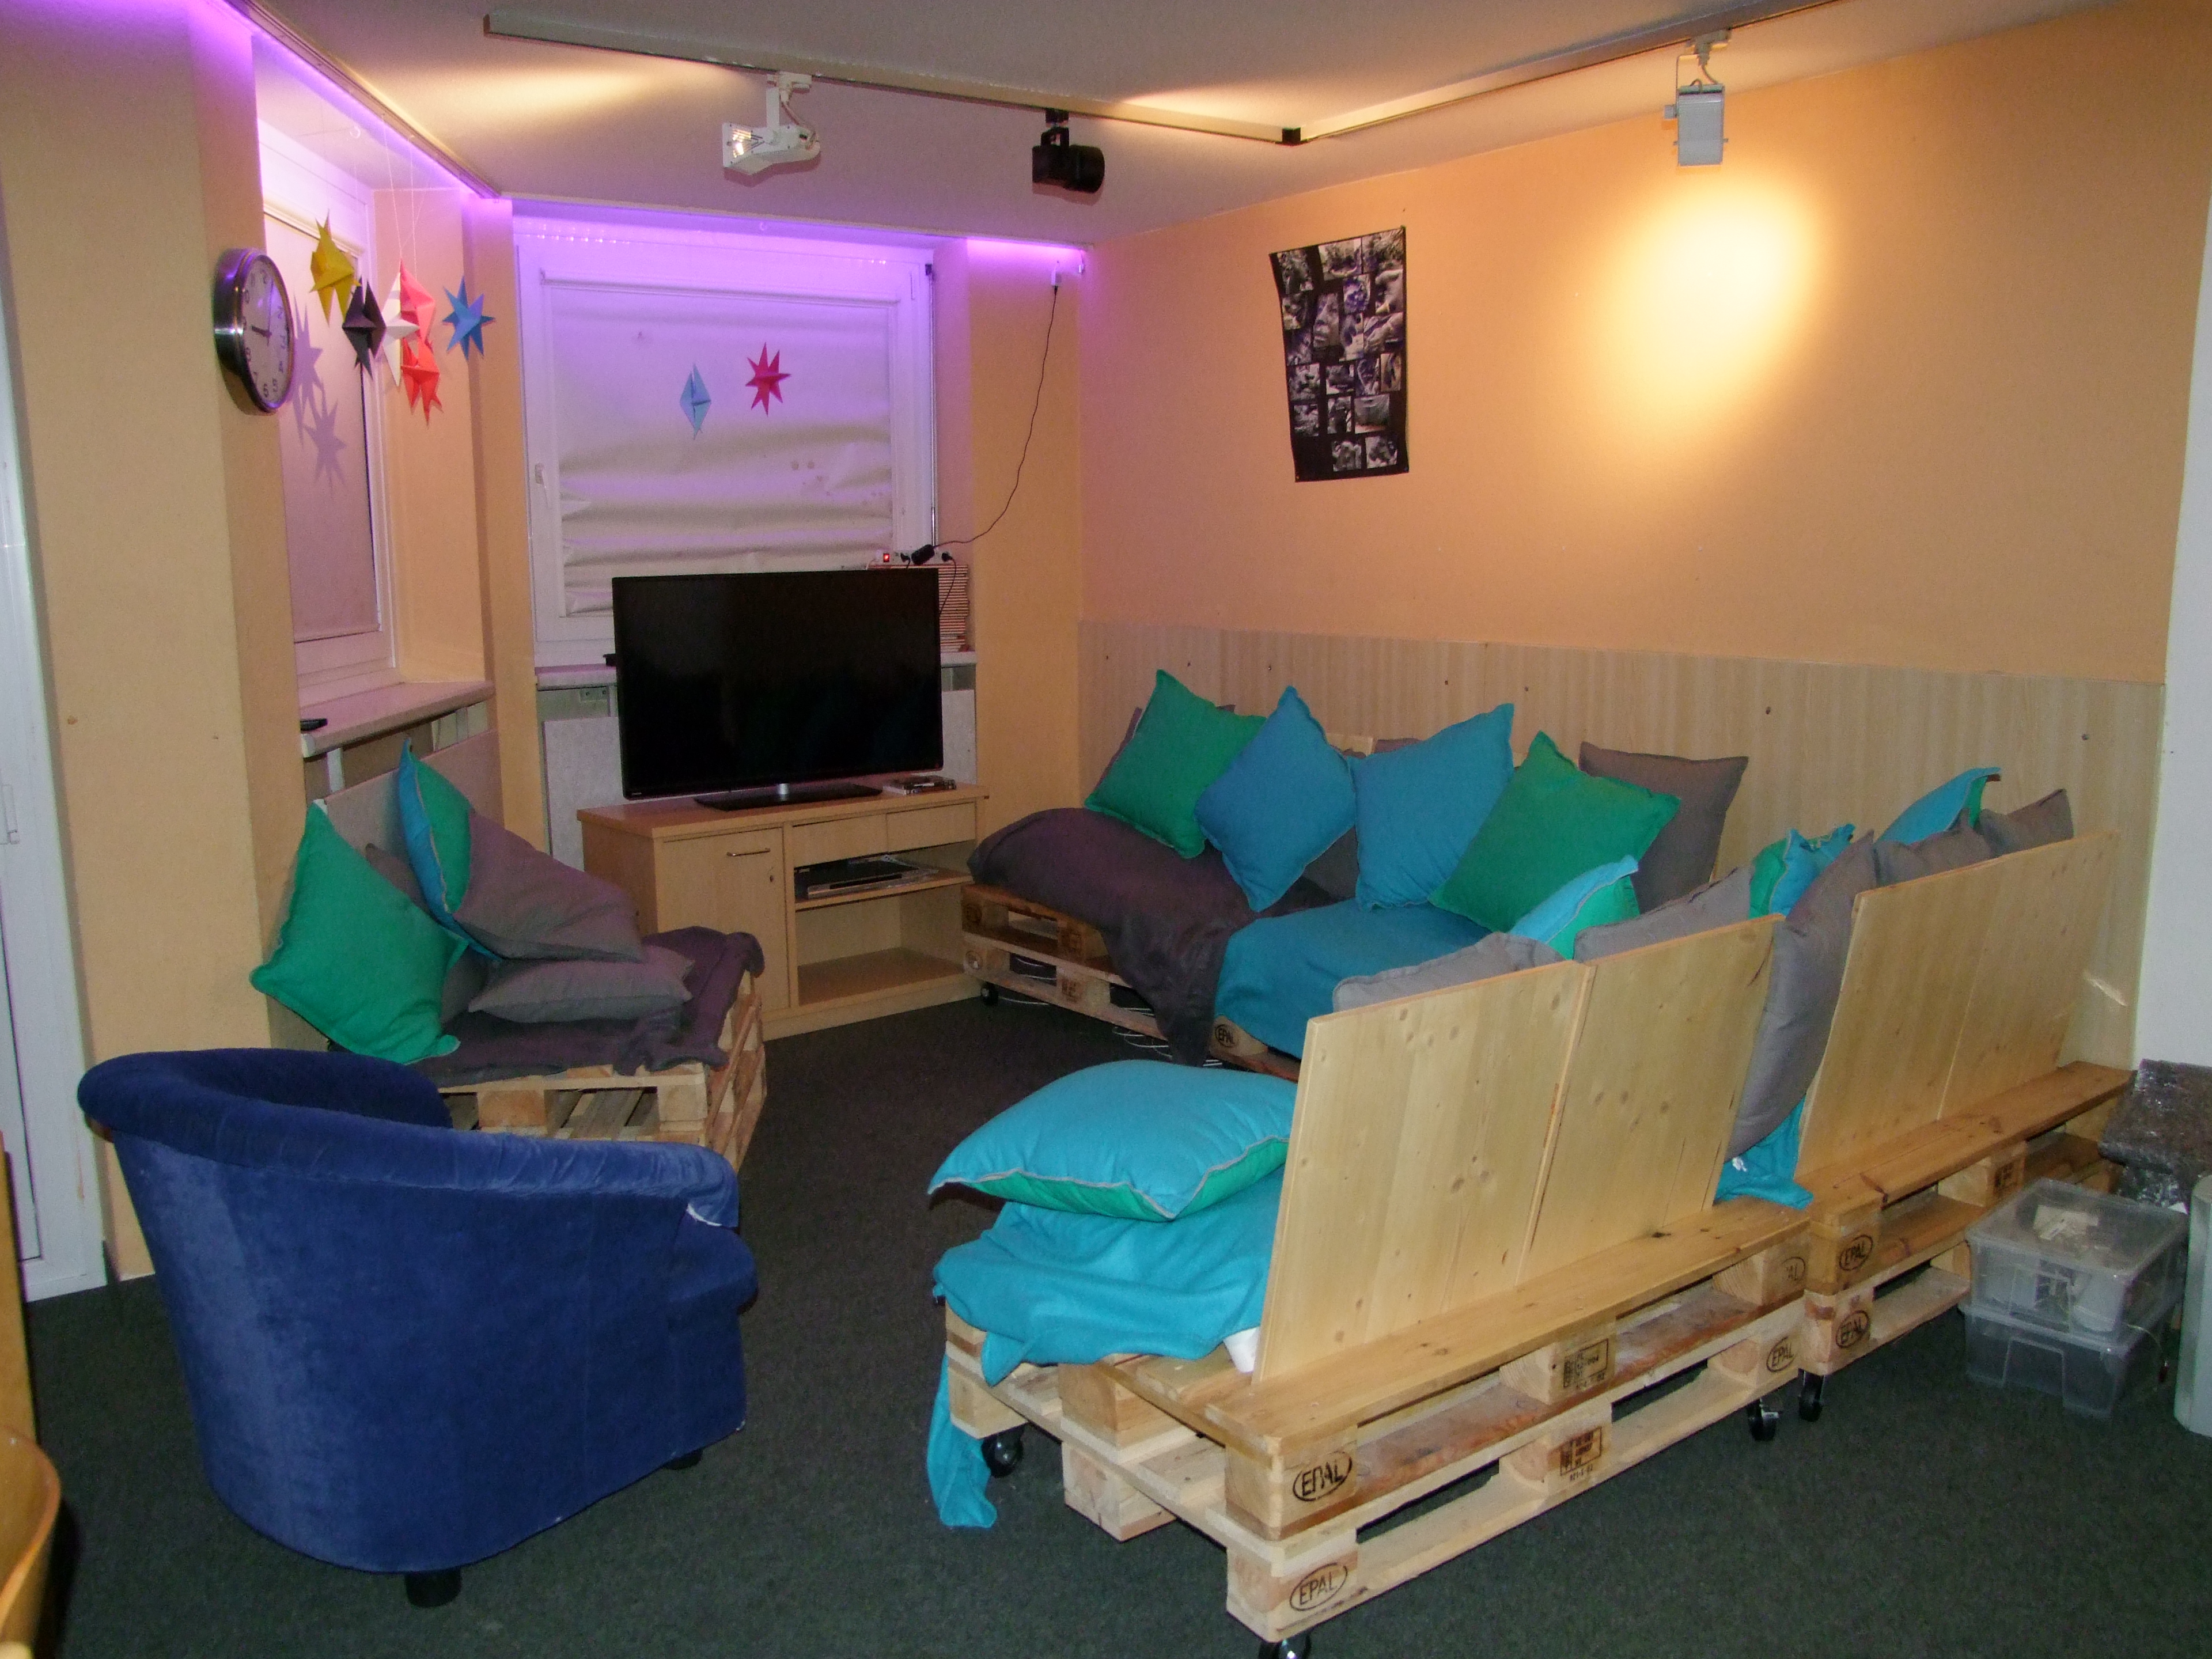 Tolle Chilling Lounge   – oder?